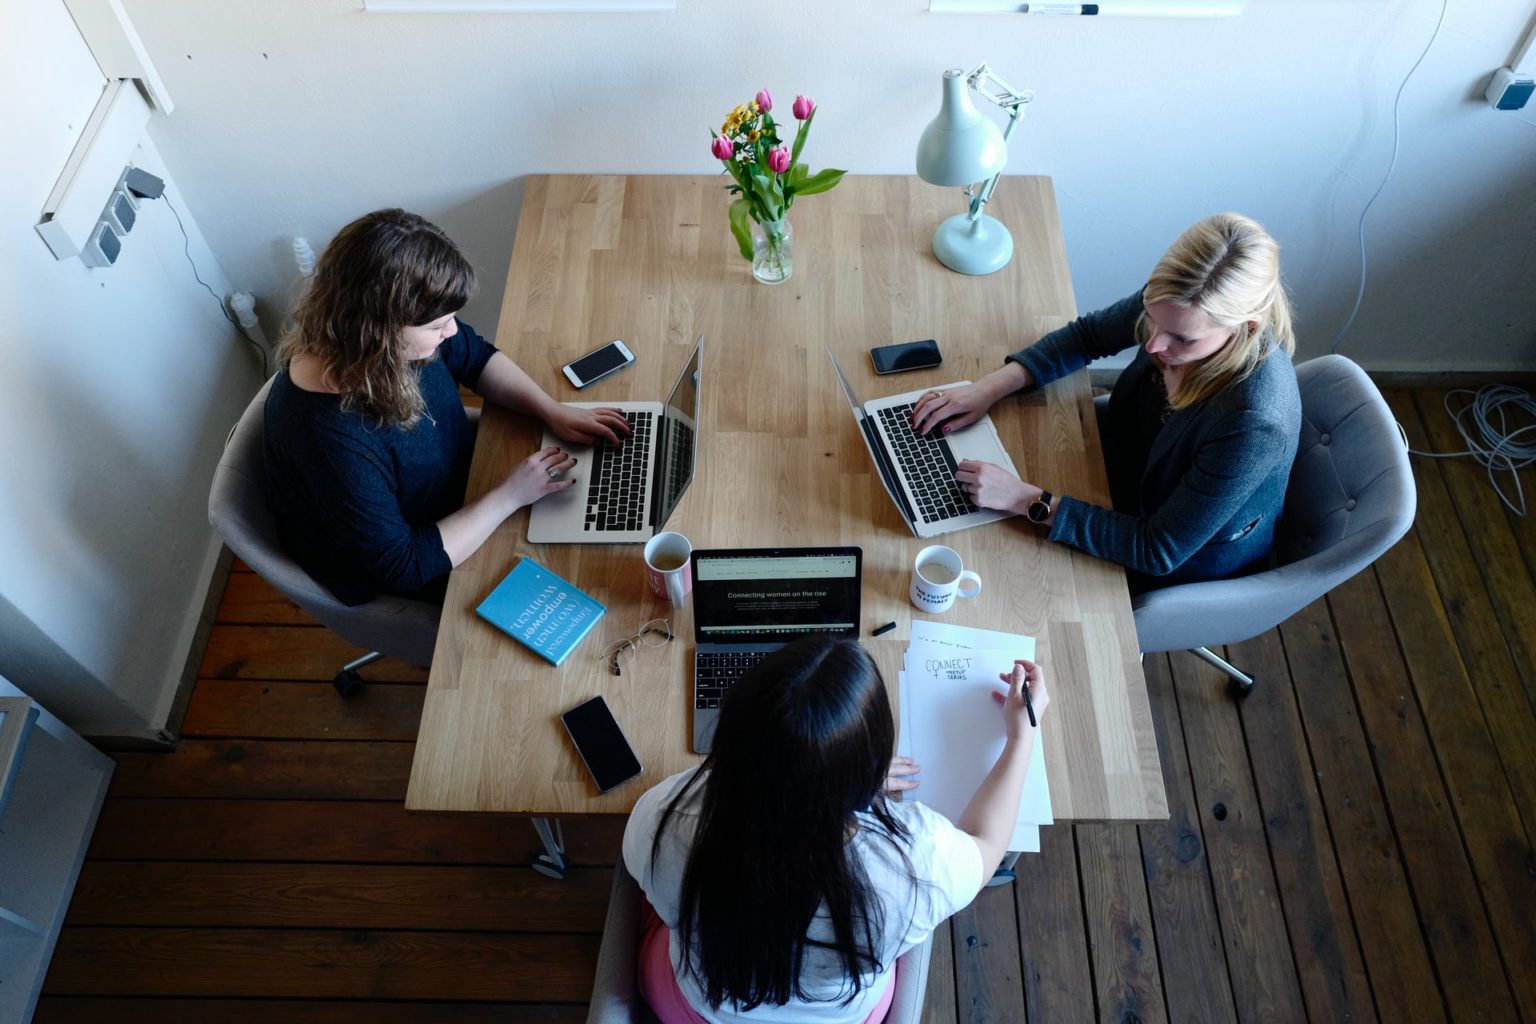 a group of women sitting at a table working on laptops